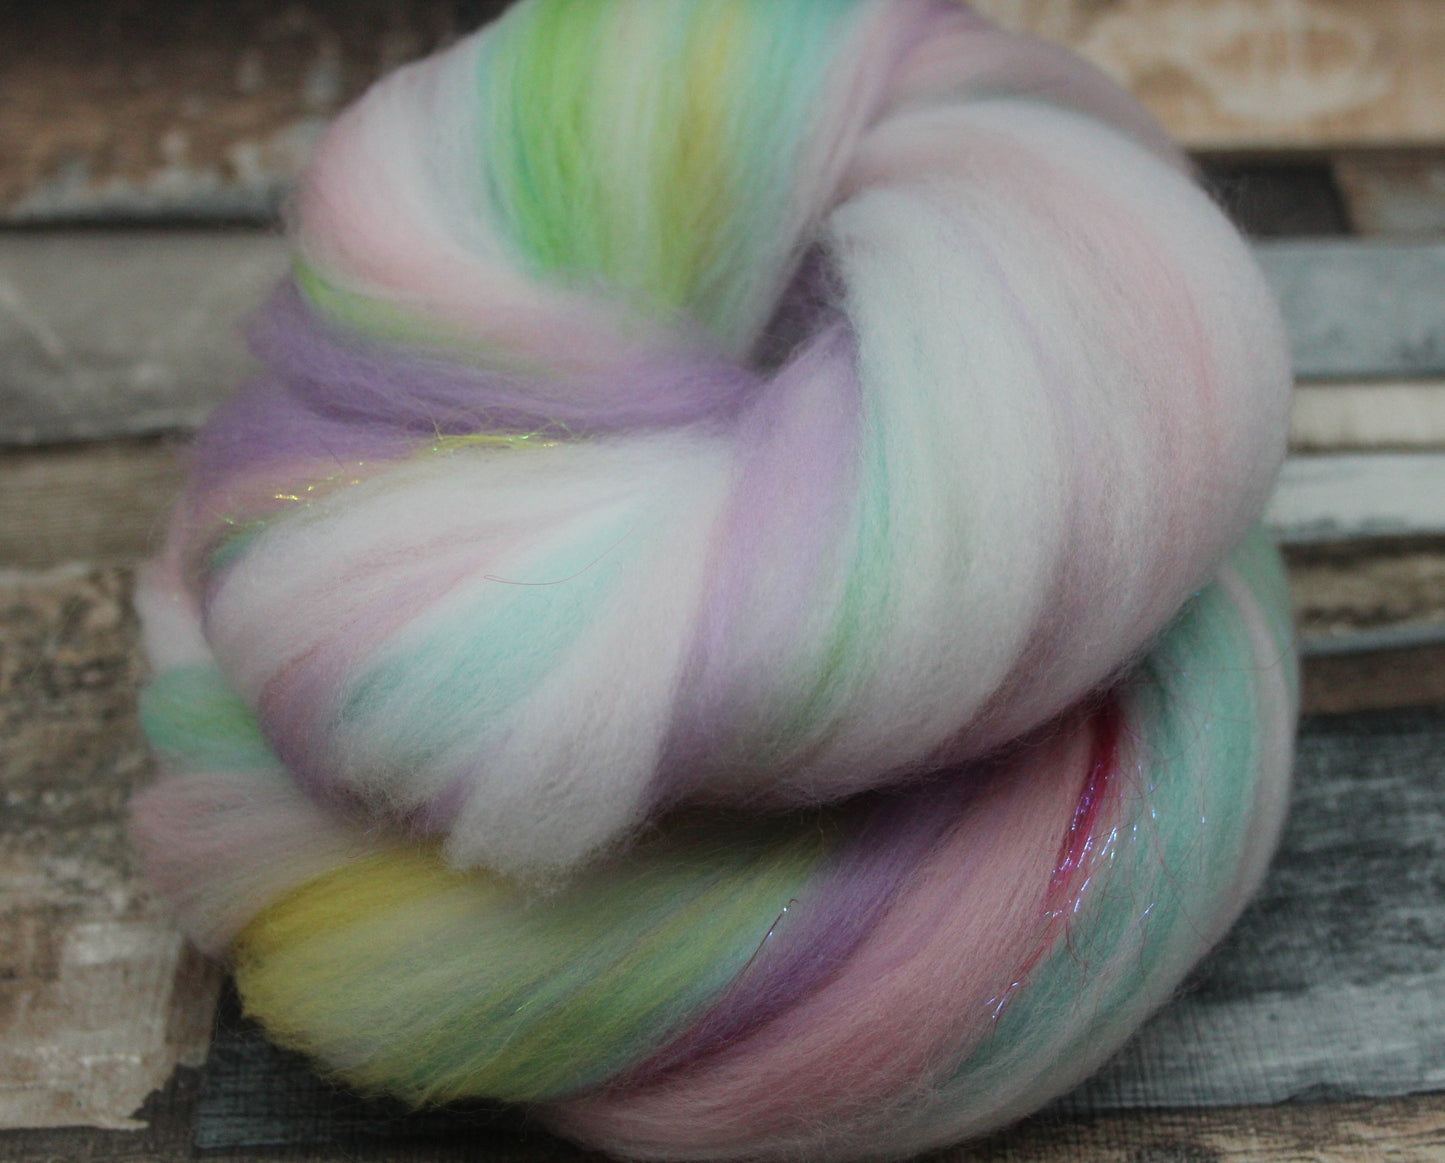 Wool Blend - Pink Turquoise Yellow Purple Green - 32 grams / 1.1 oz  - Fibre for felting, weaving or spinning